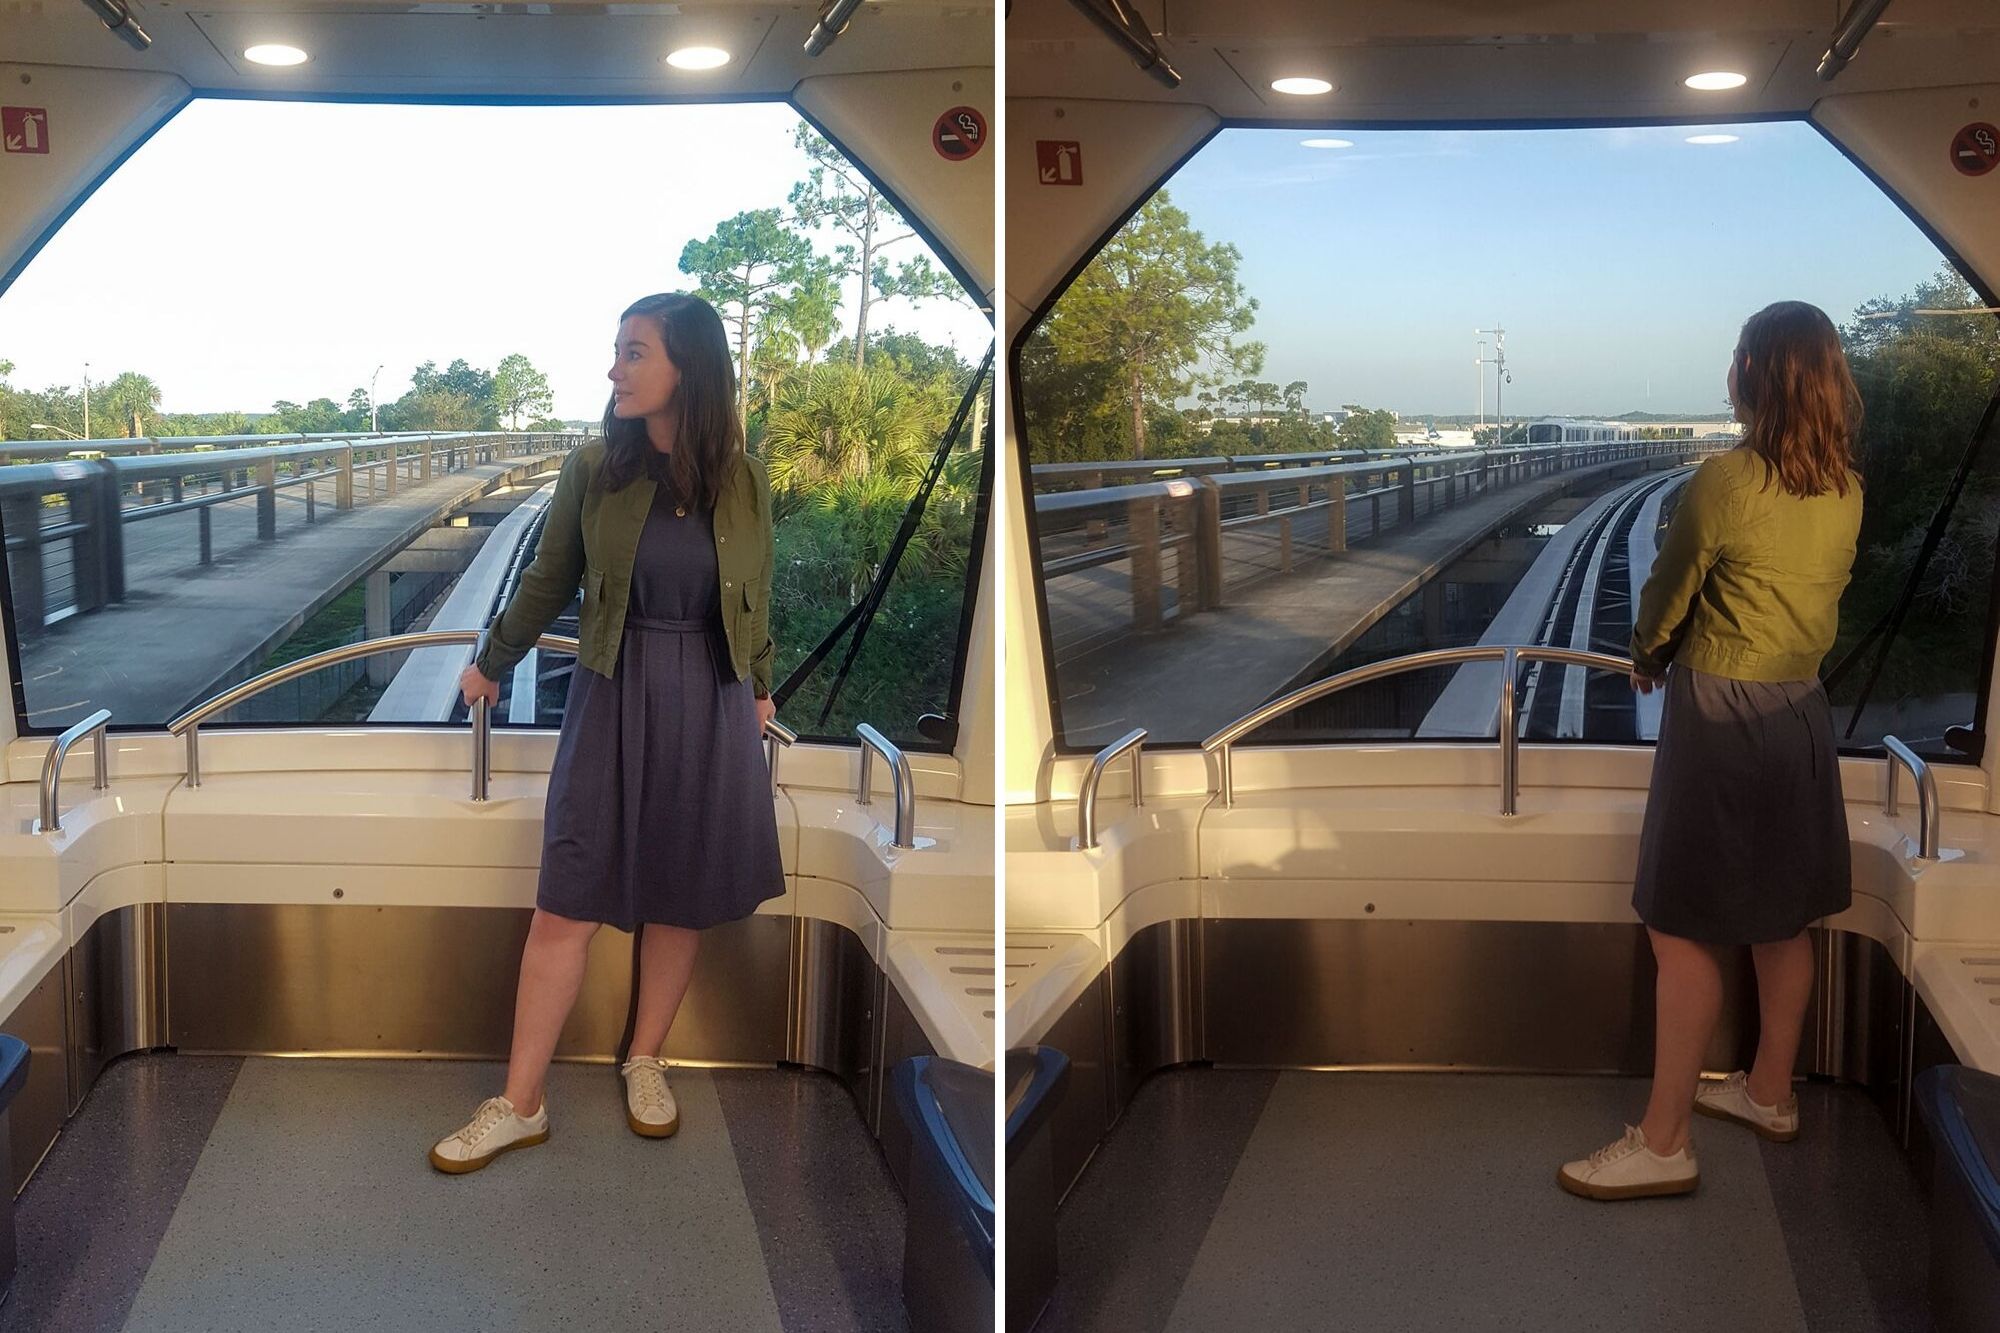 Alyssa riding the monorail at the Orlando airport